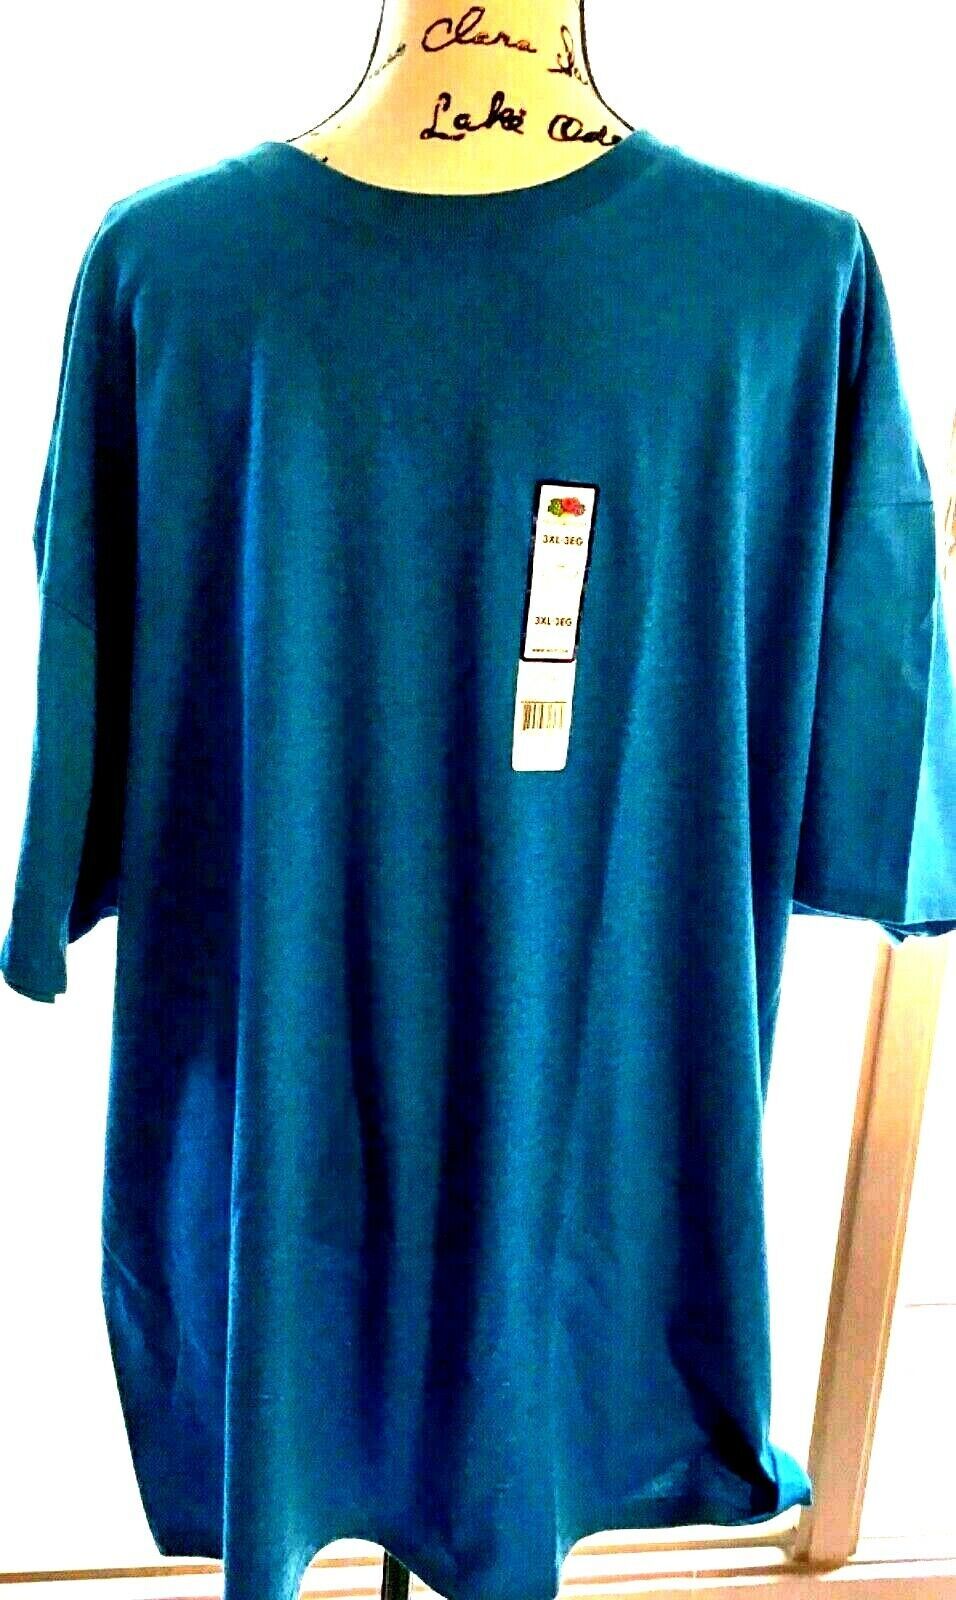 Primary image for NWT Men’s Fruit of the Loom Blue 3XL TShirt New Cotton Polyester SKU 044-03